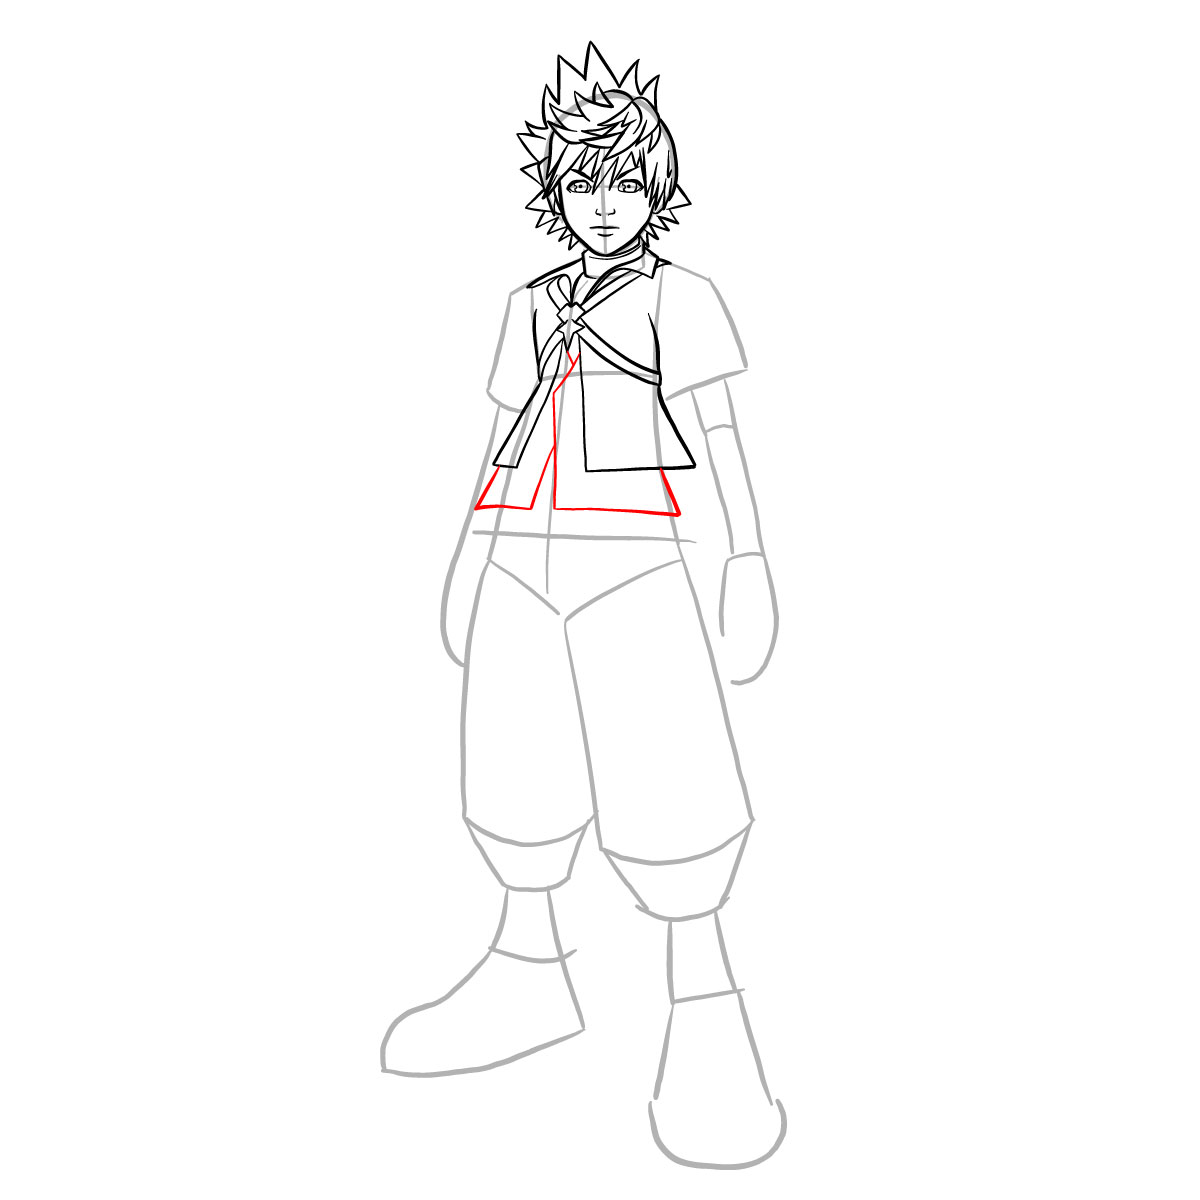 How to draw Ventus - step 22